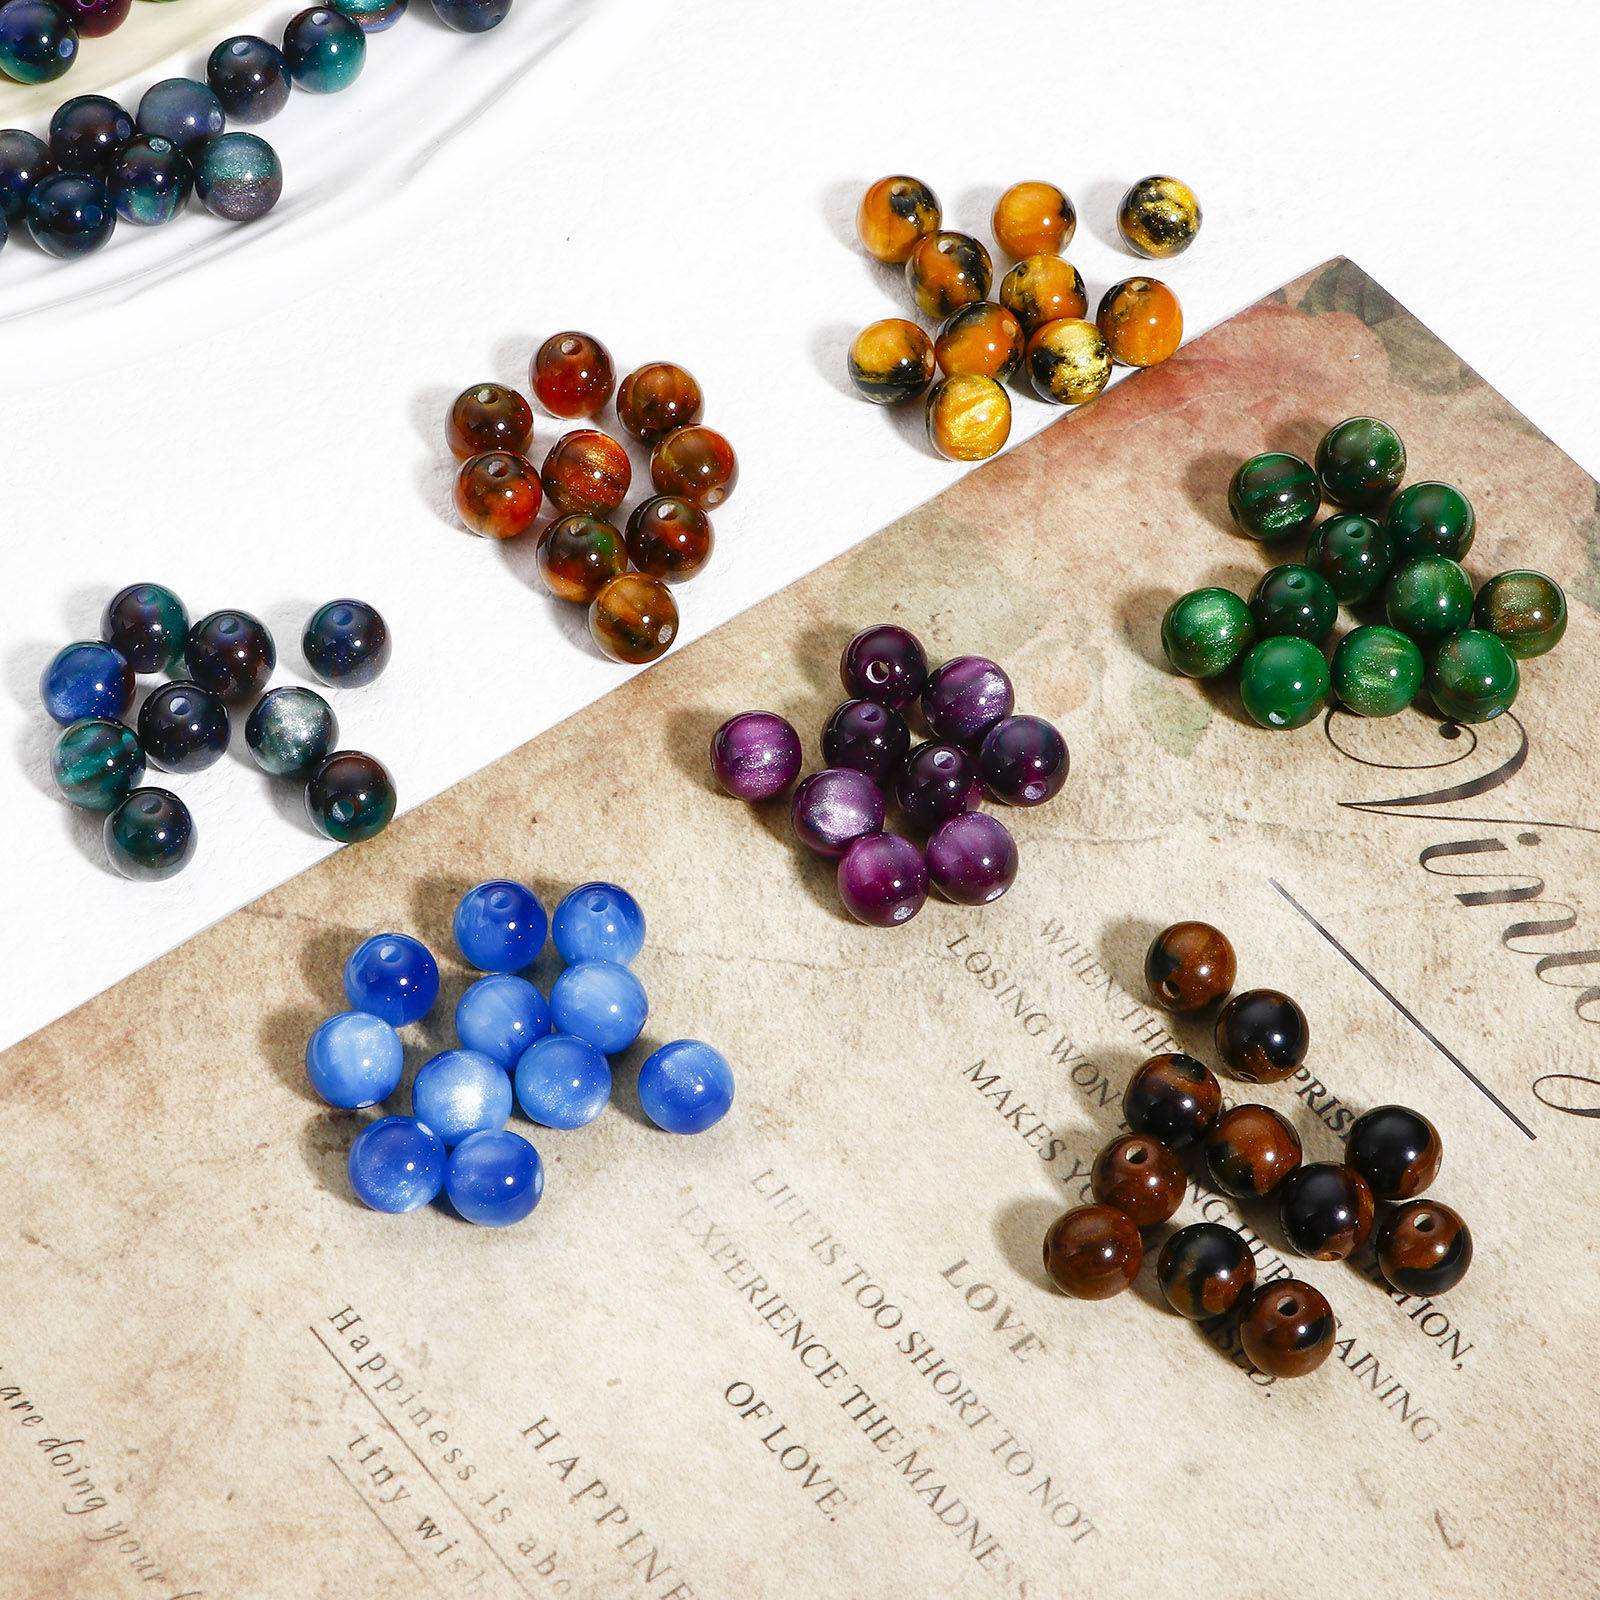 Bild von Acrylic Beads For DIY Charm Jewelry Making Multicolor Round Watercolor About 8mm Dia., Hole: Approx 1.5mm, 100 PCs